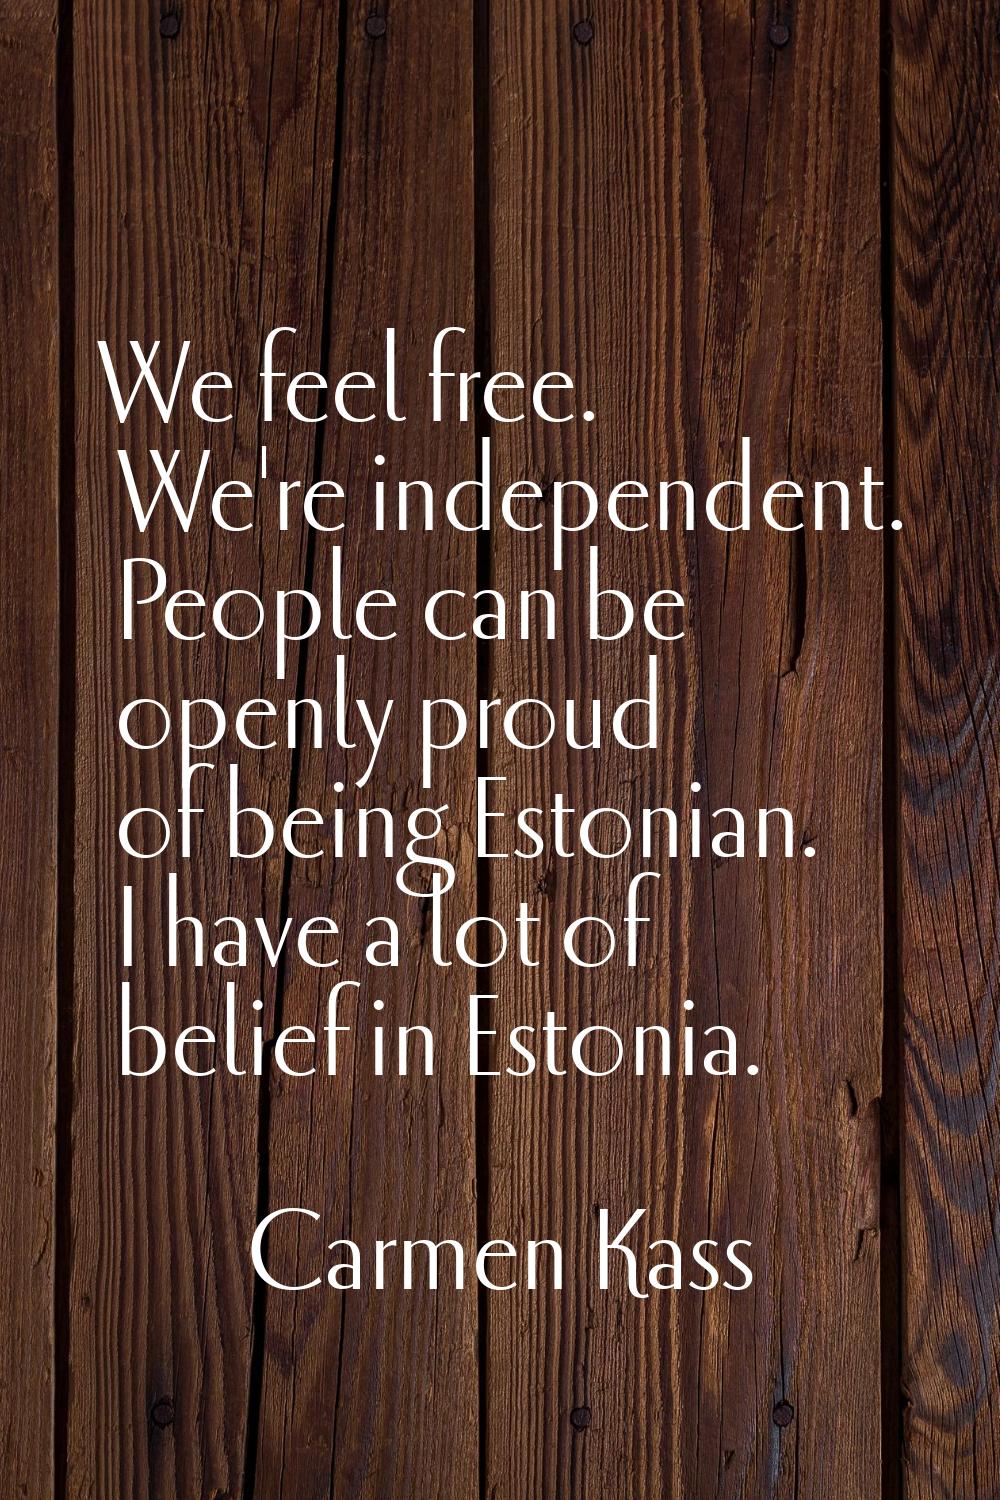 We feel free. We're independent. People can be openly proud of being Estonian. I have a lot of beli